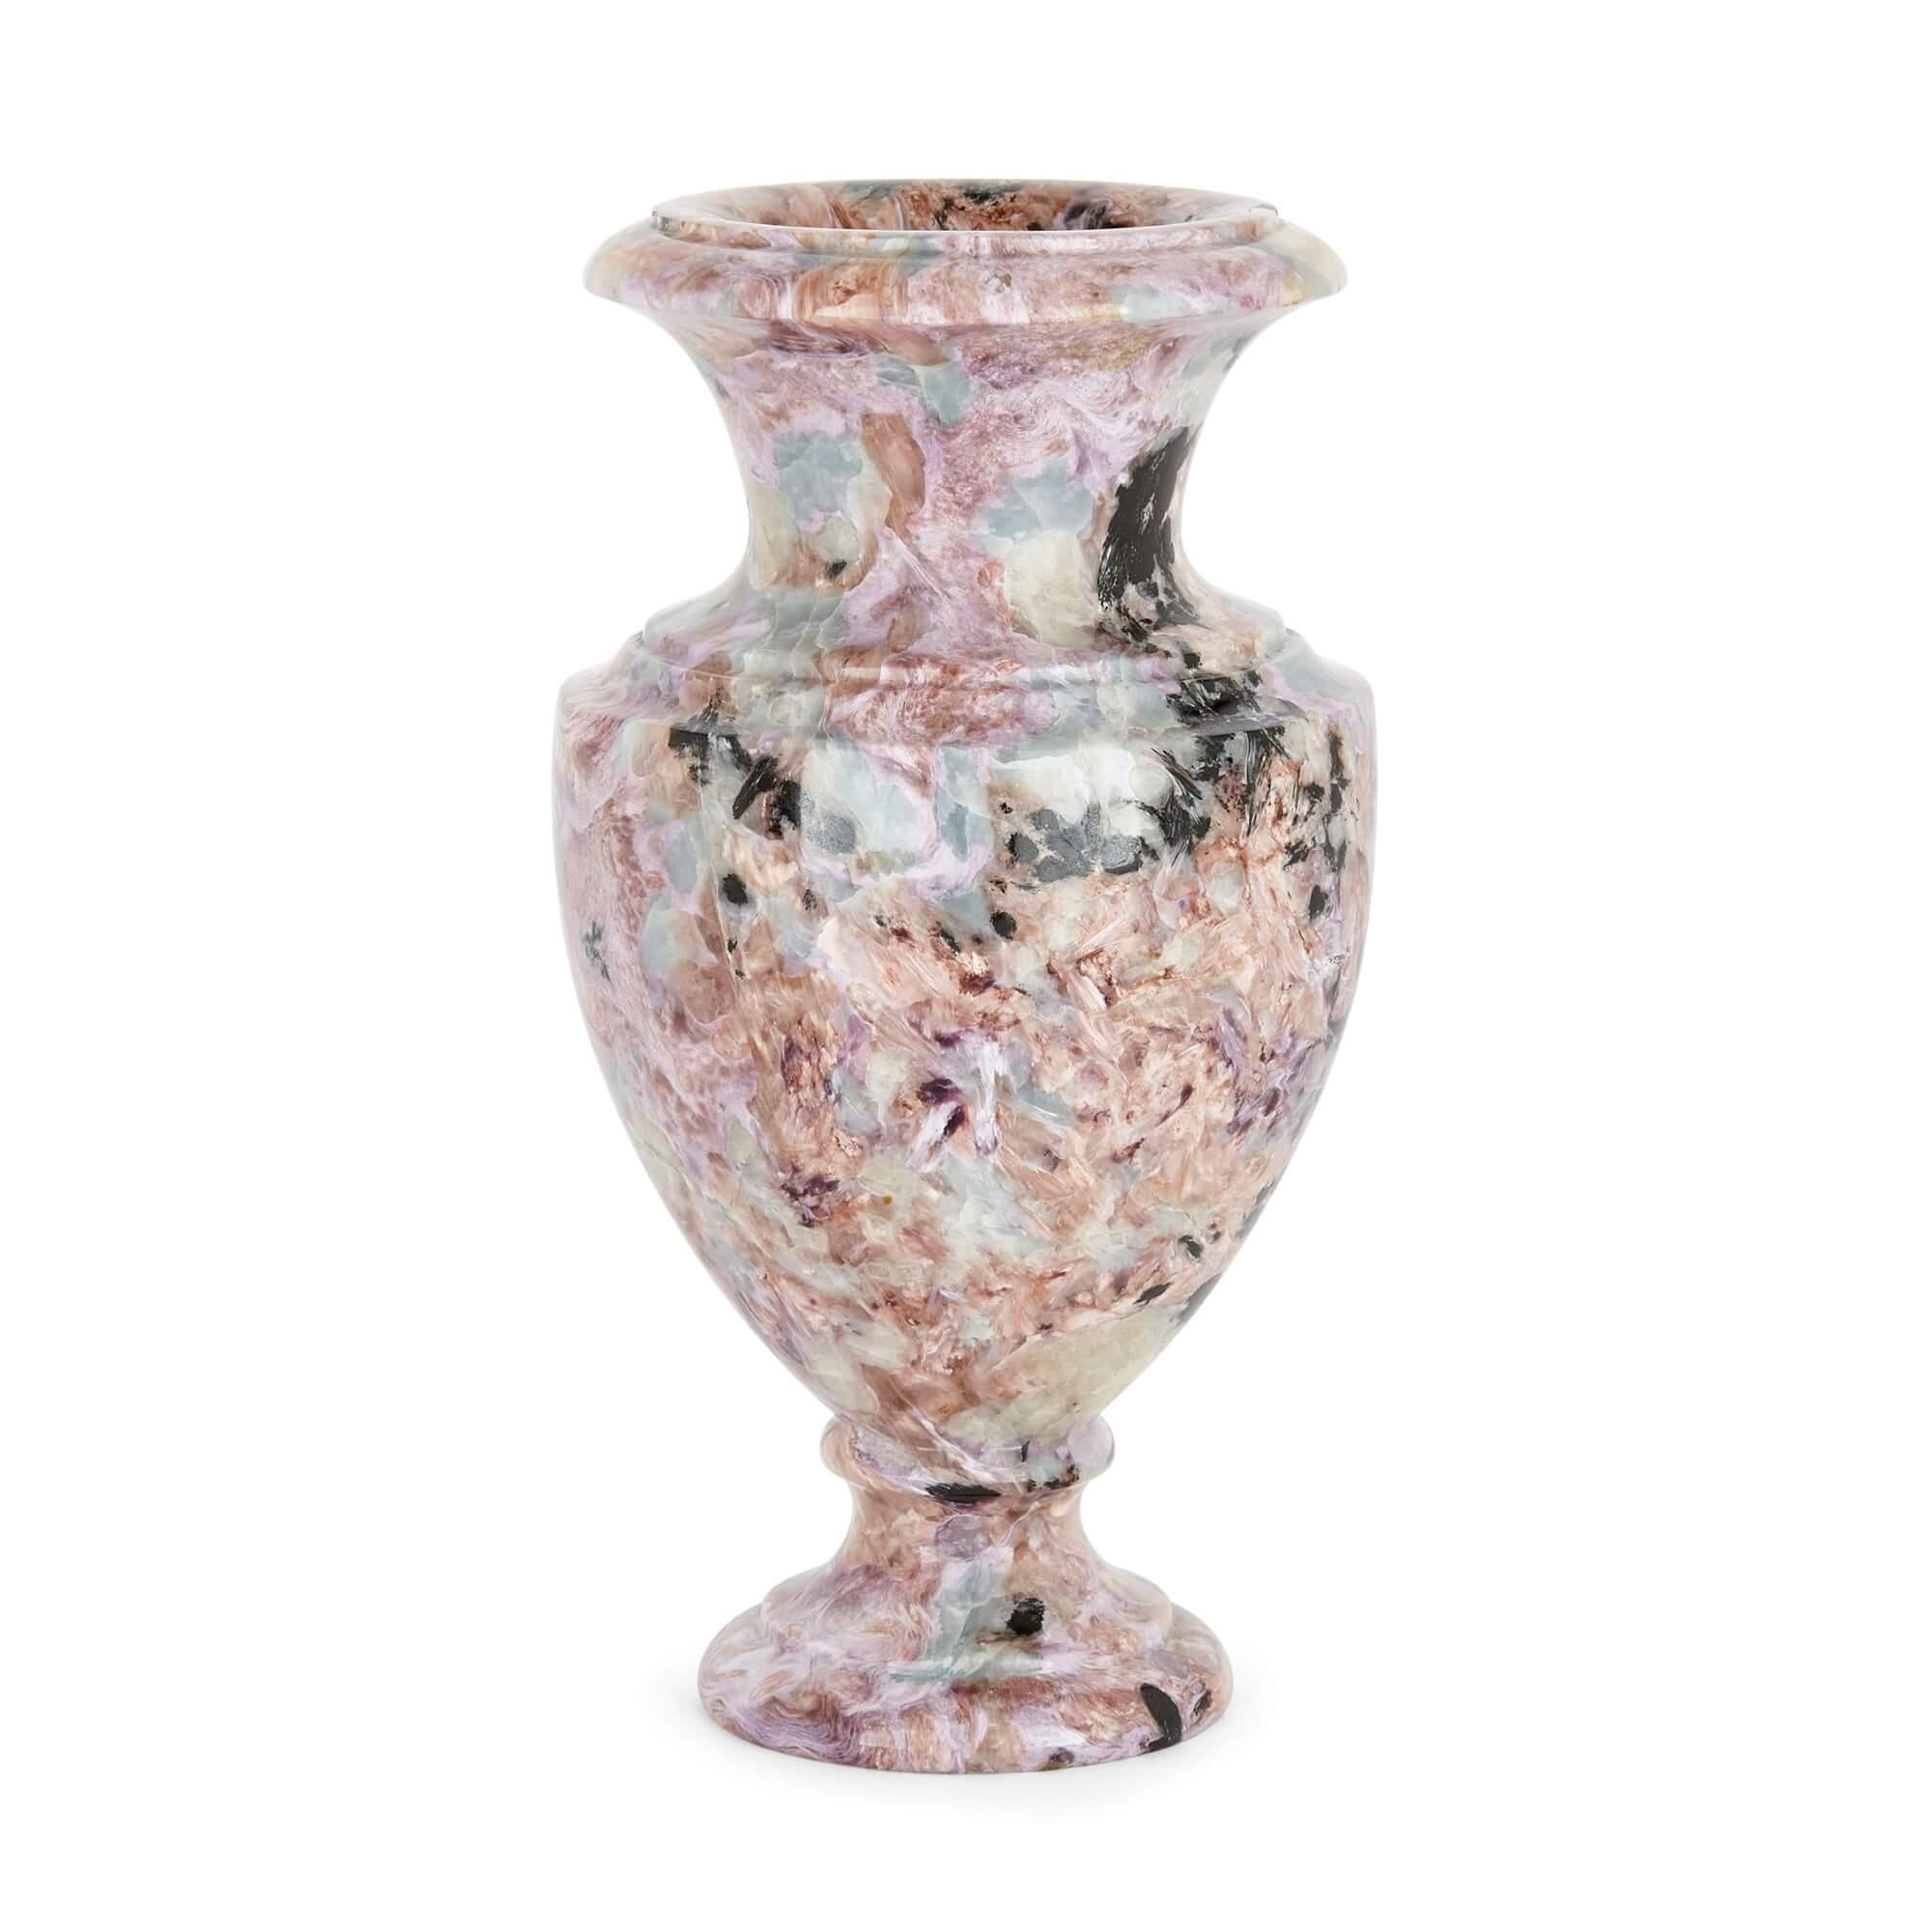 Pink and green variegated onyx Russian urn shaped vase
Russian, 20th century
Measures: Height 24cm, width 12cm, depth 11.5cm

Of slightly oval shape, this excellent mineral specimen piece is an urn-shaped vase made from Russian pink and green